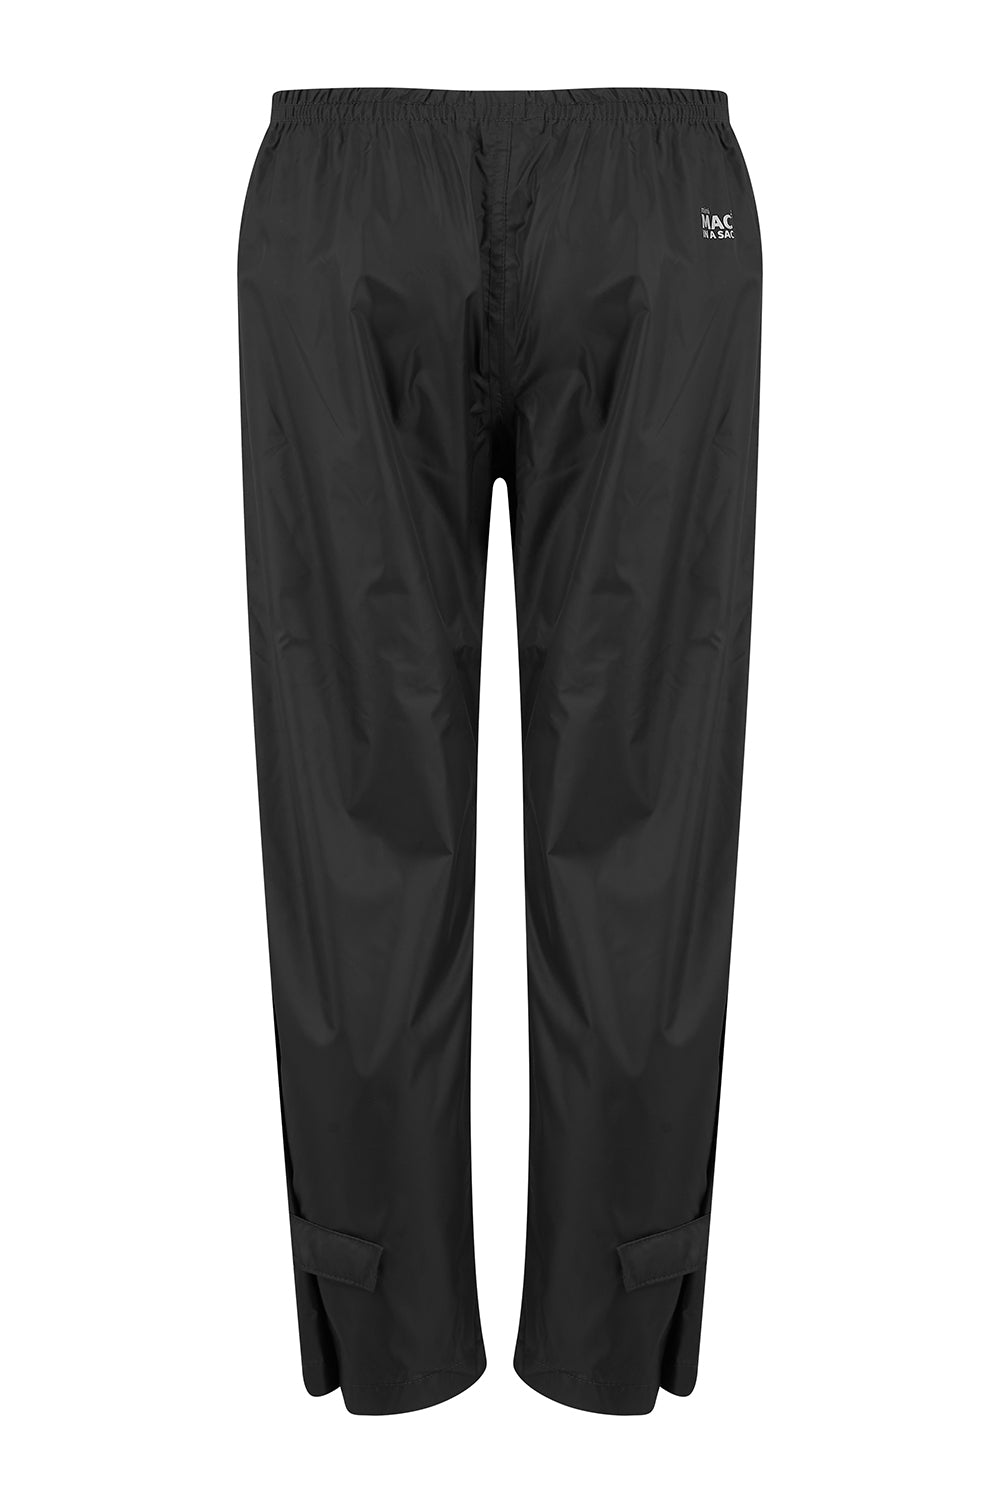 Overtrousers Mini Kids Overtrousers - Black